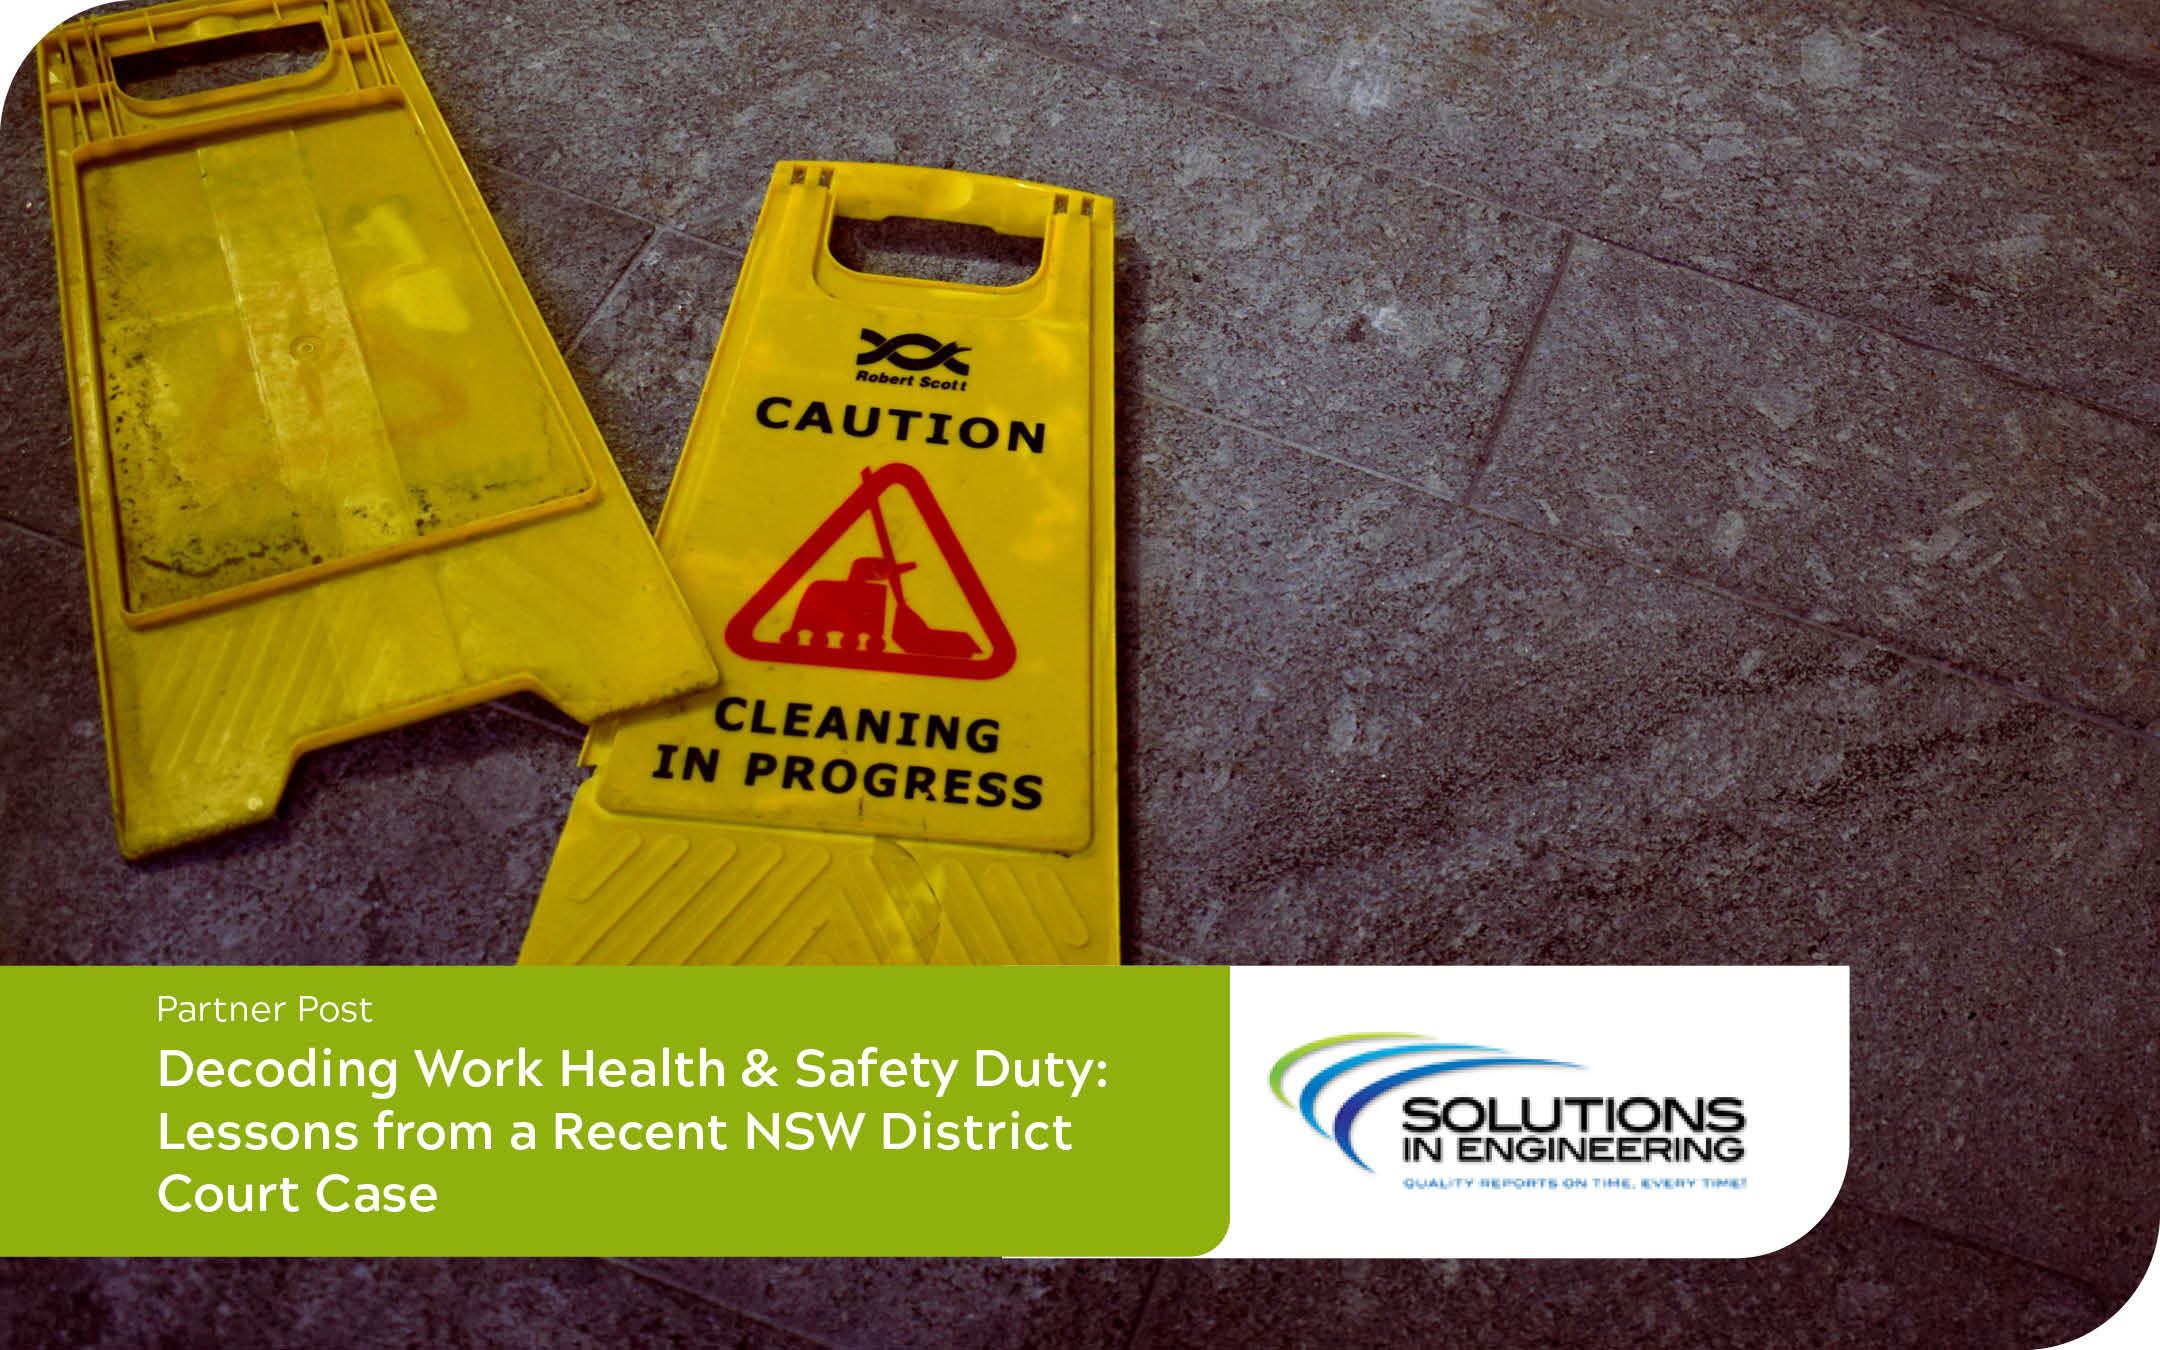 Decoding Work Health & Safety Duty: Lessons from a Recent NSW District Court Case